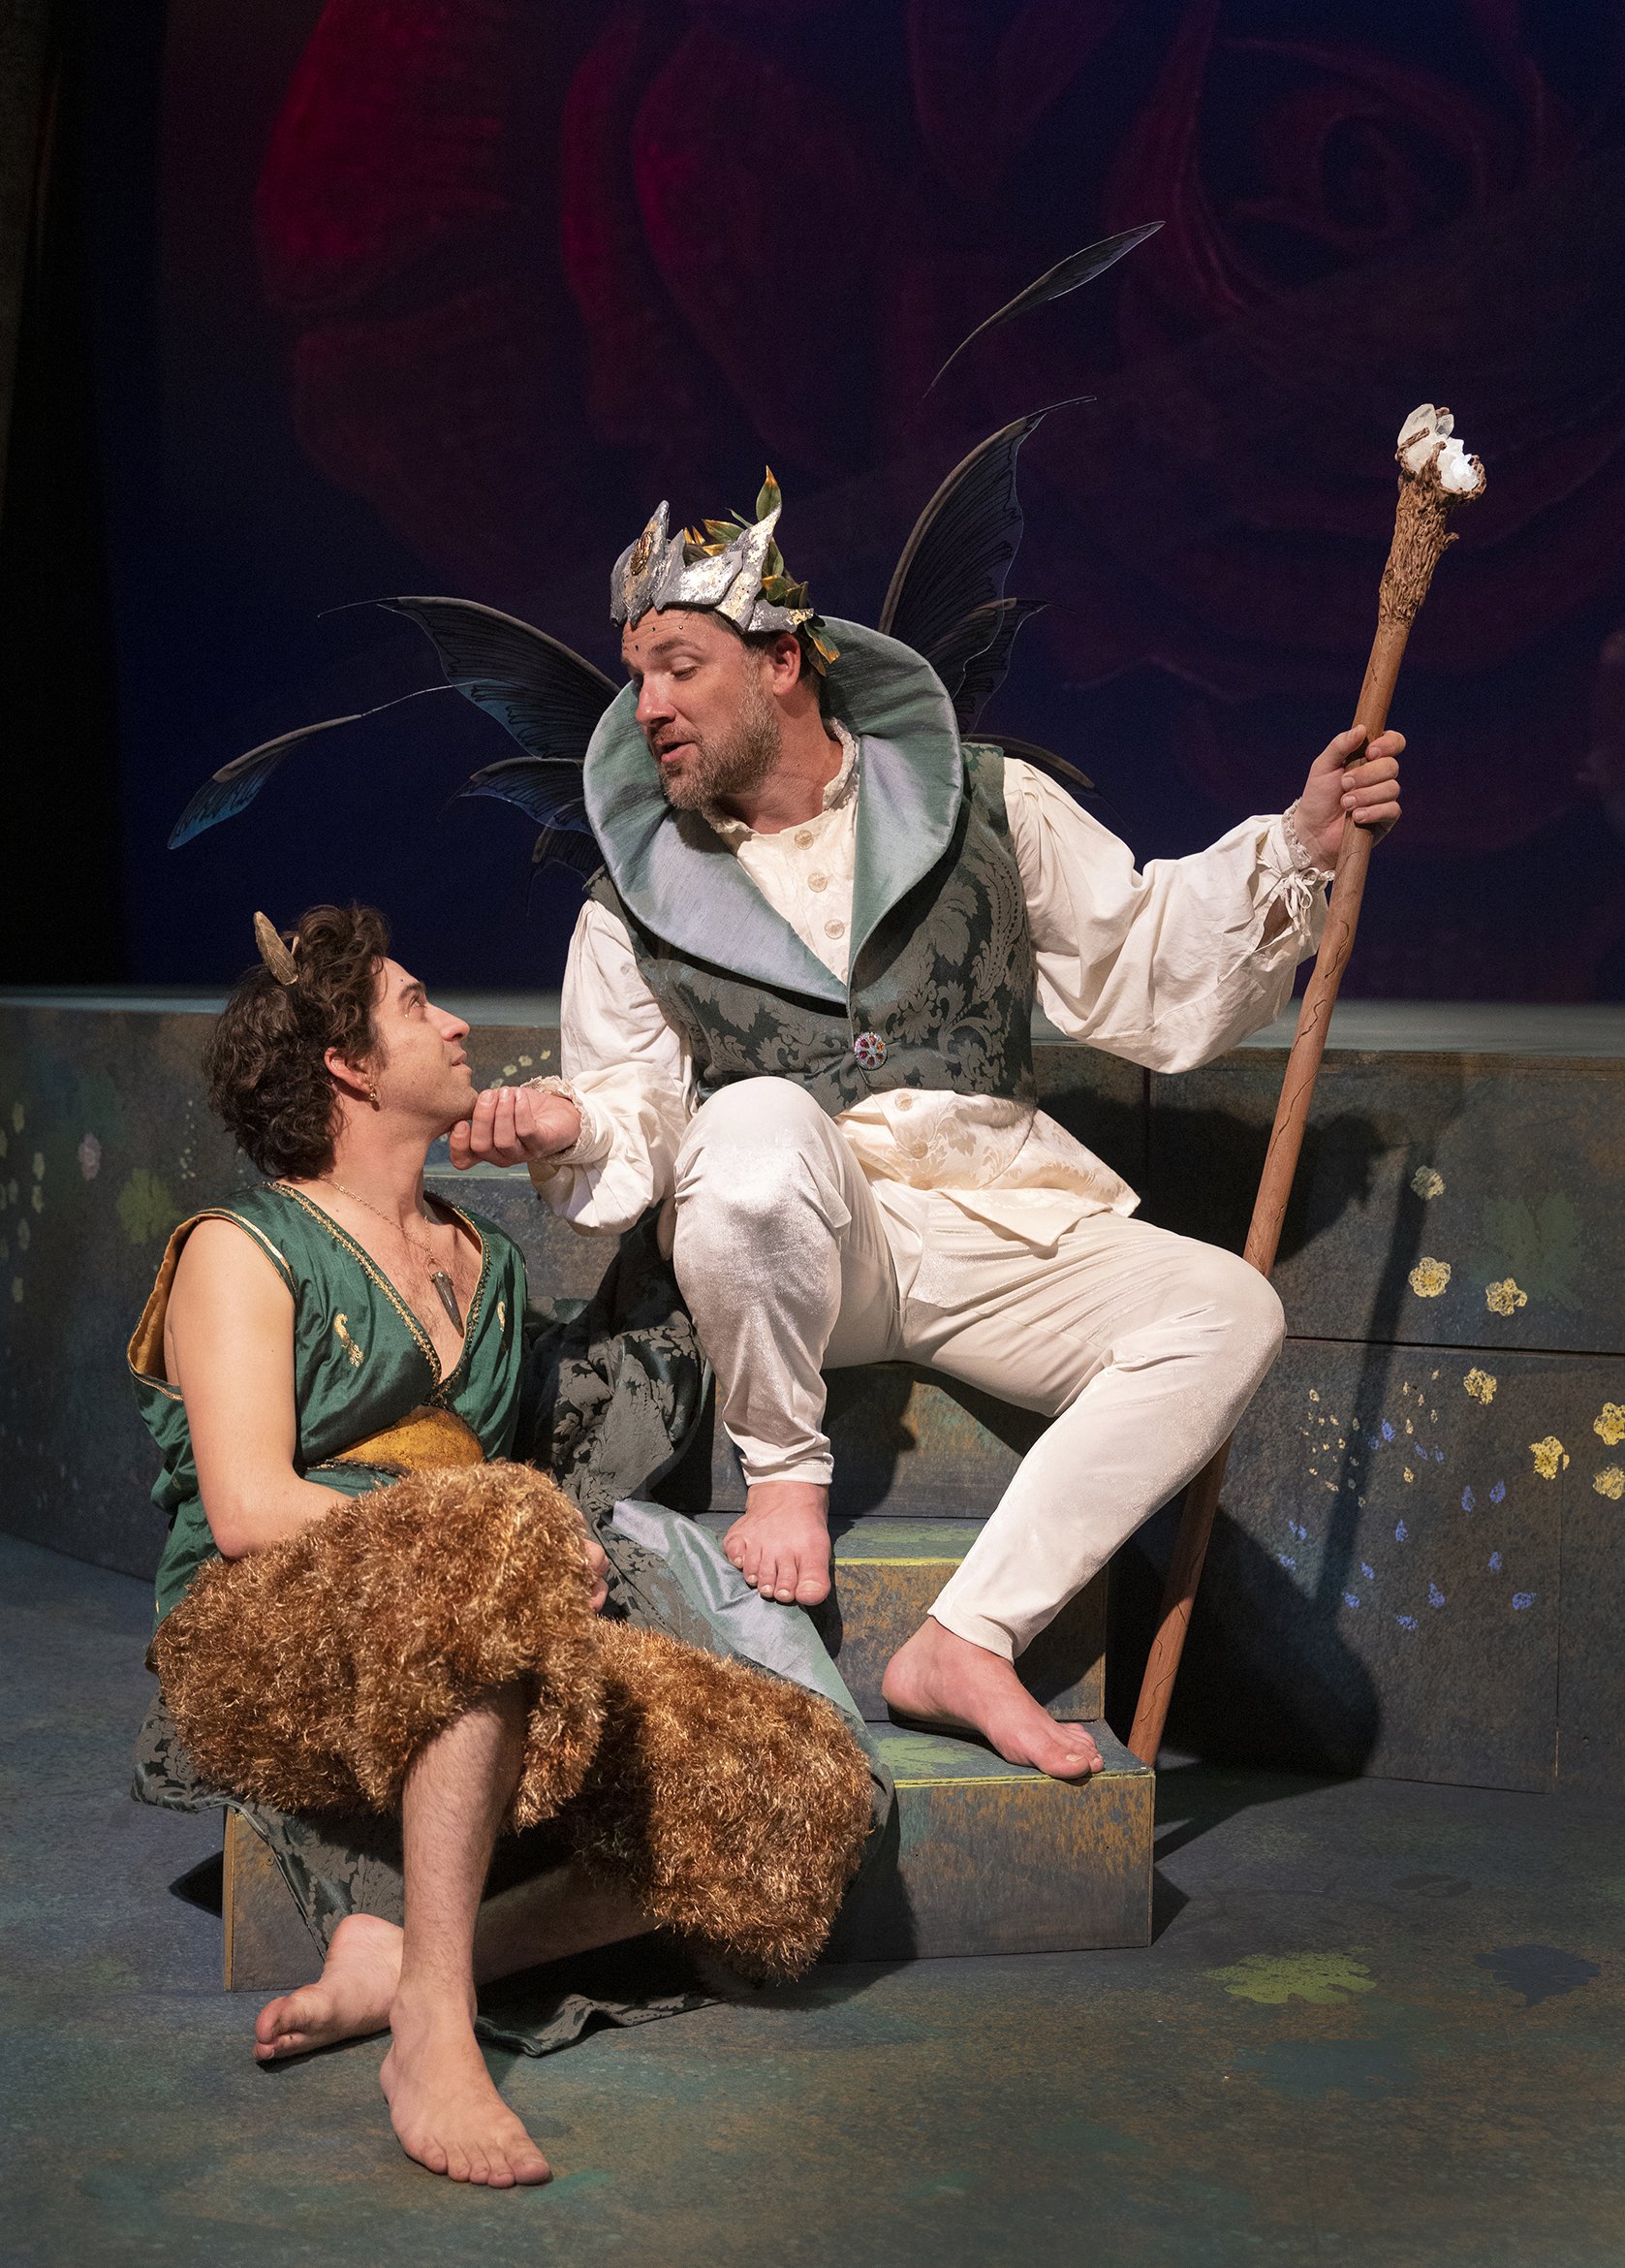 Hunter Hnat as Puck and Christopher Johnson as Oberon. Photo by Tim Fuller.